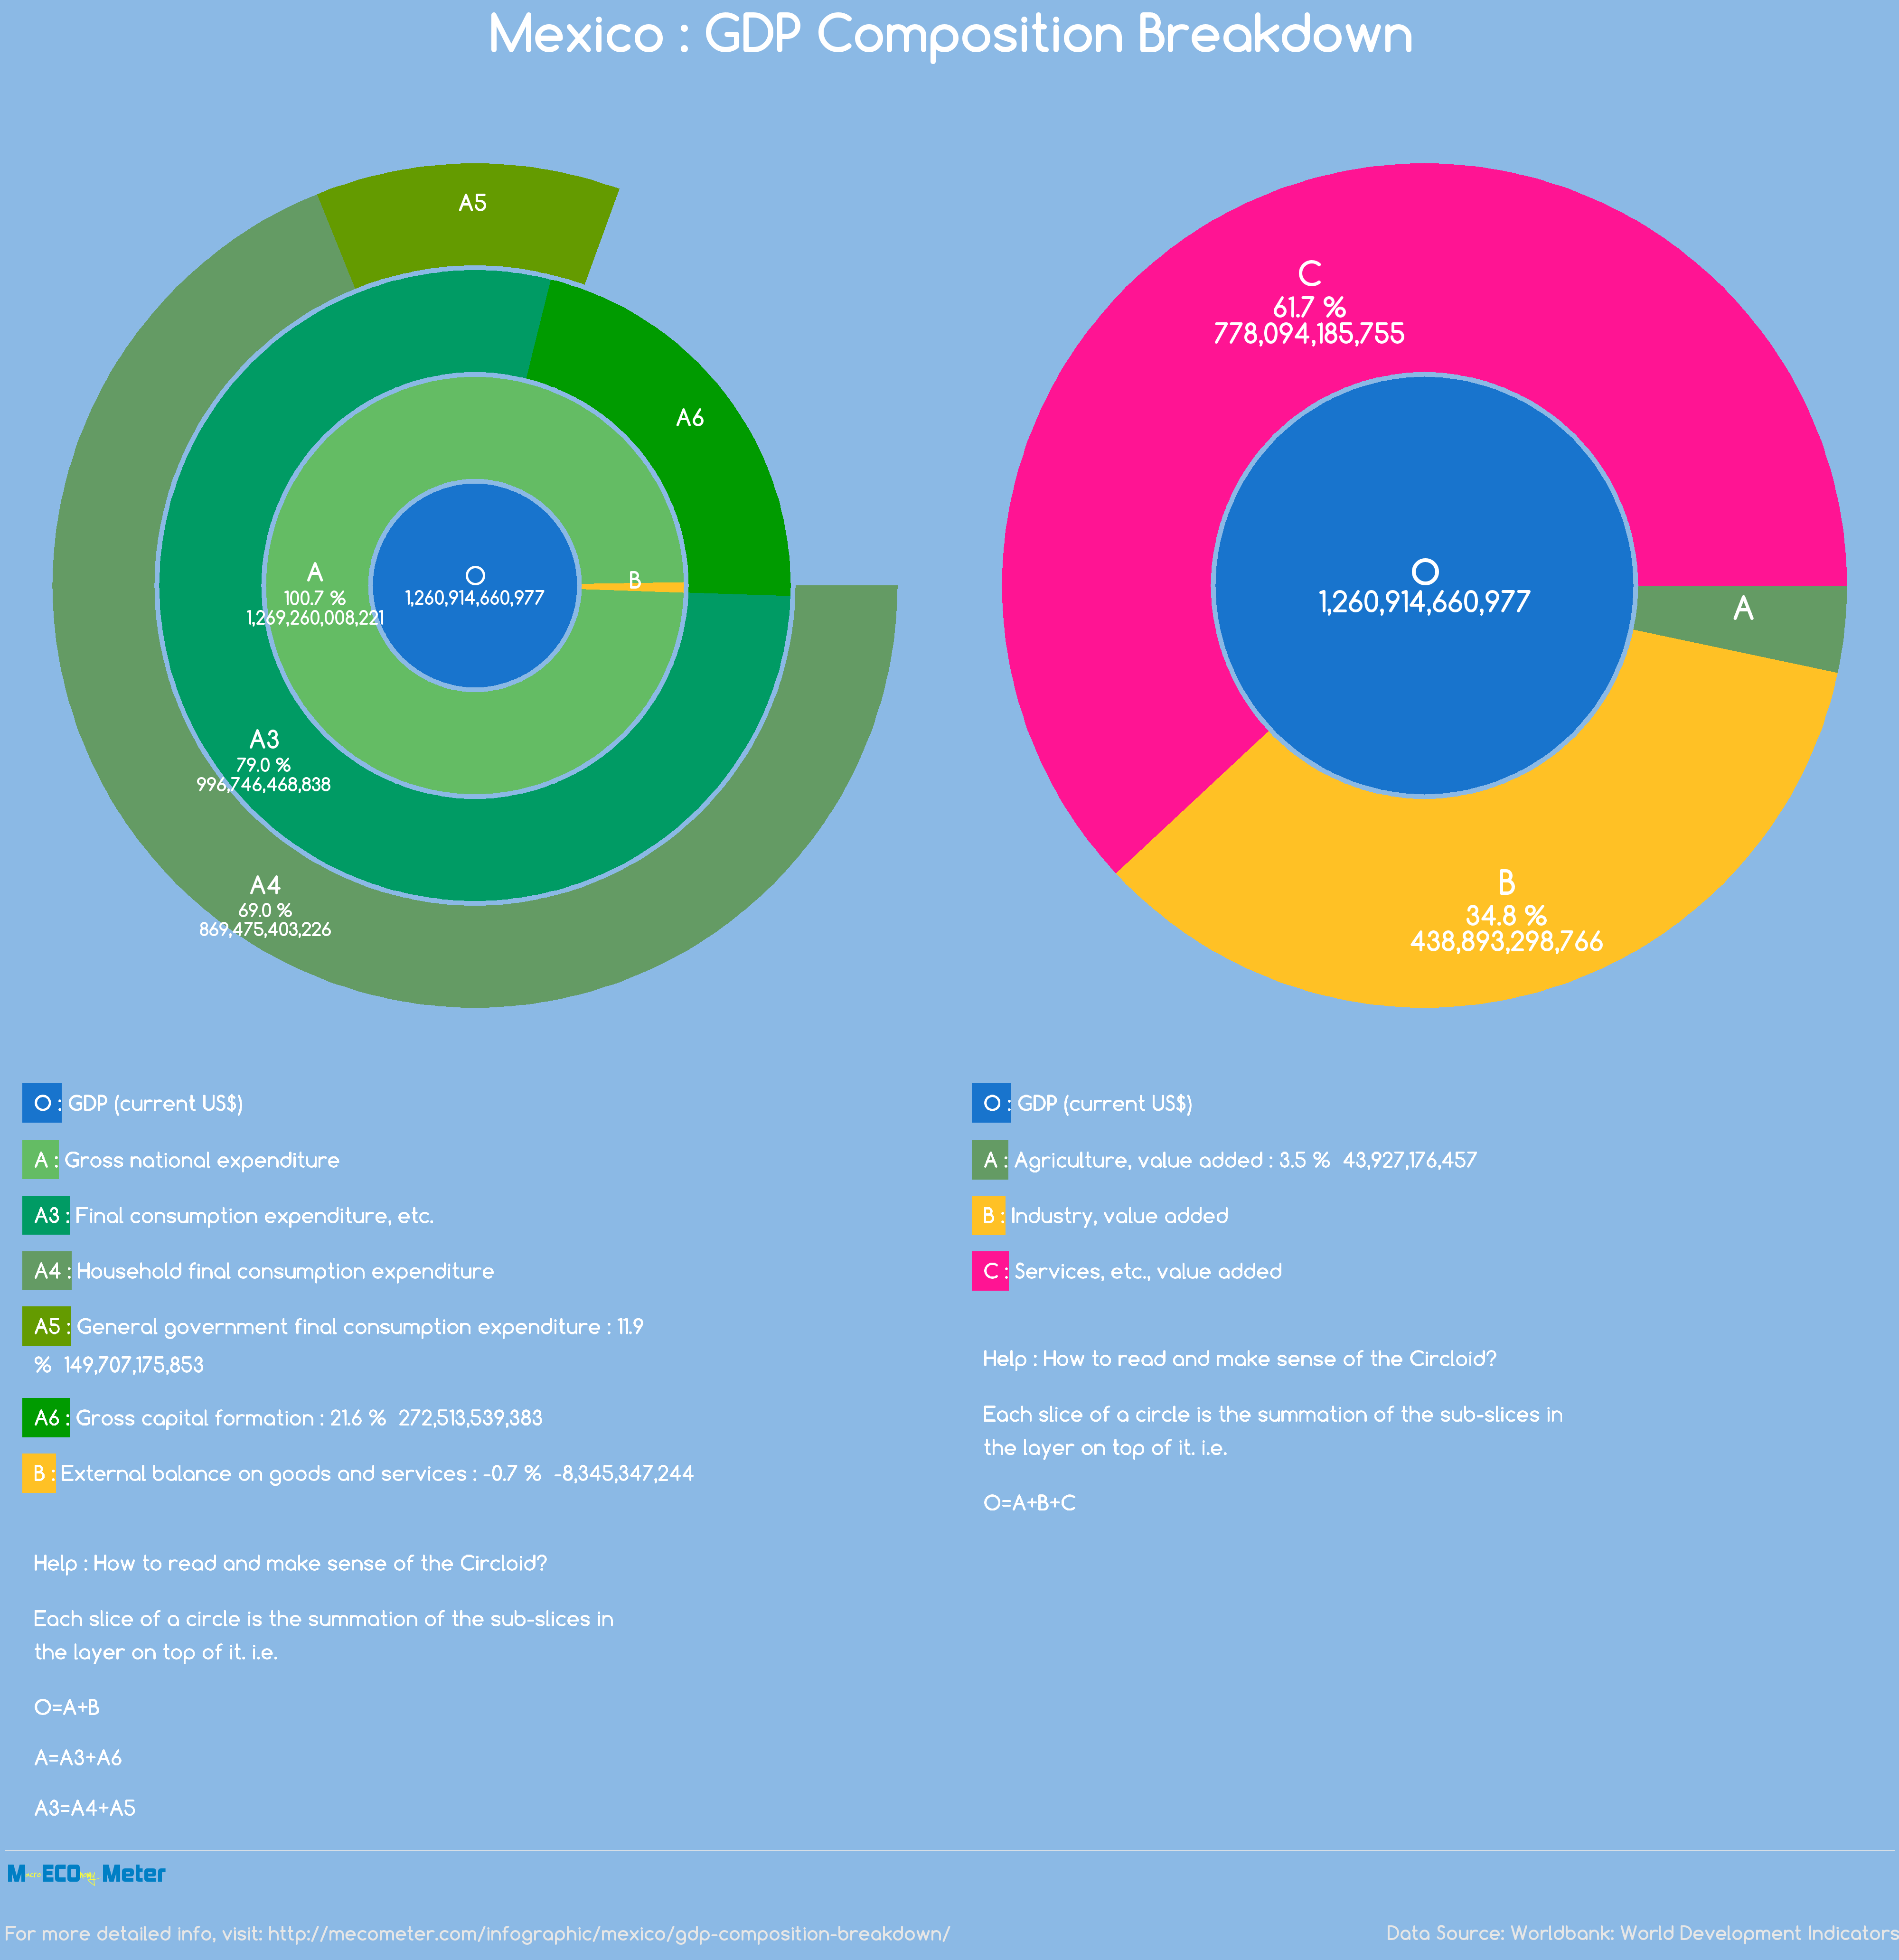 Mexico : GDP Composition Breakdown